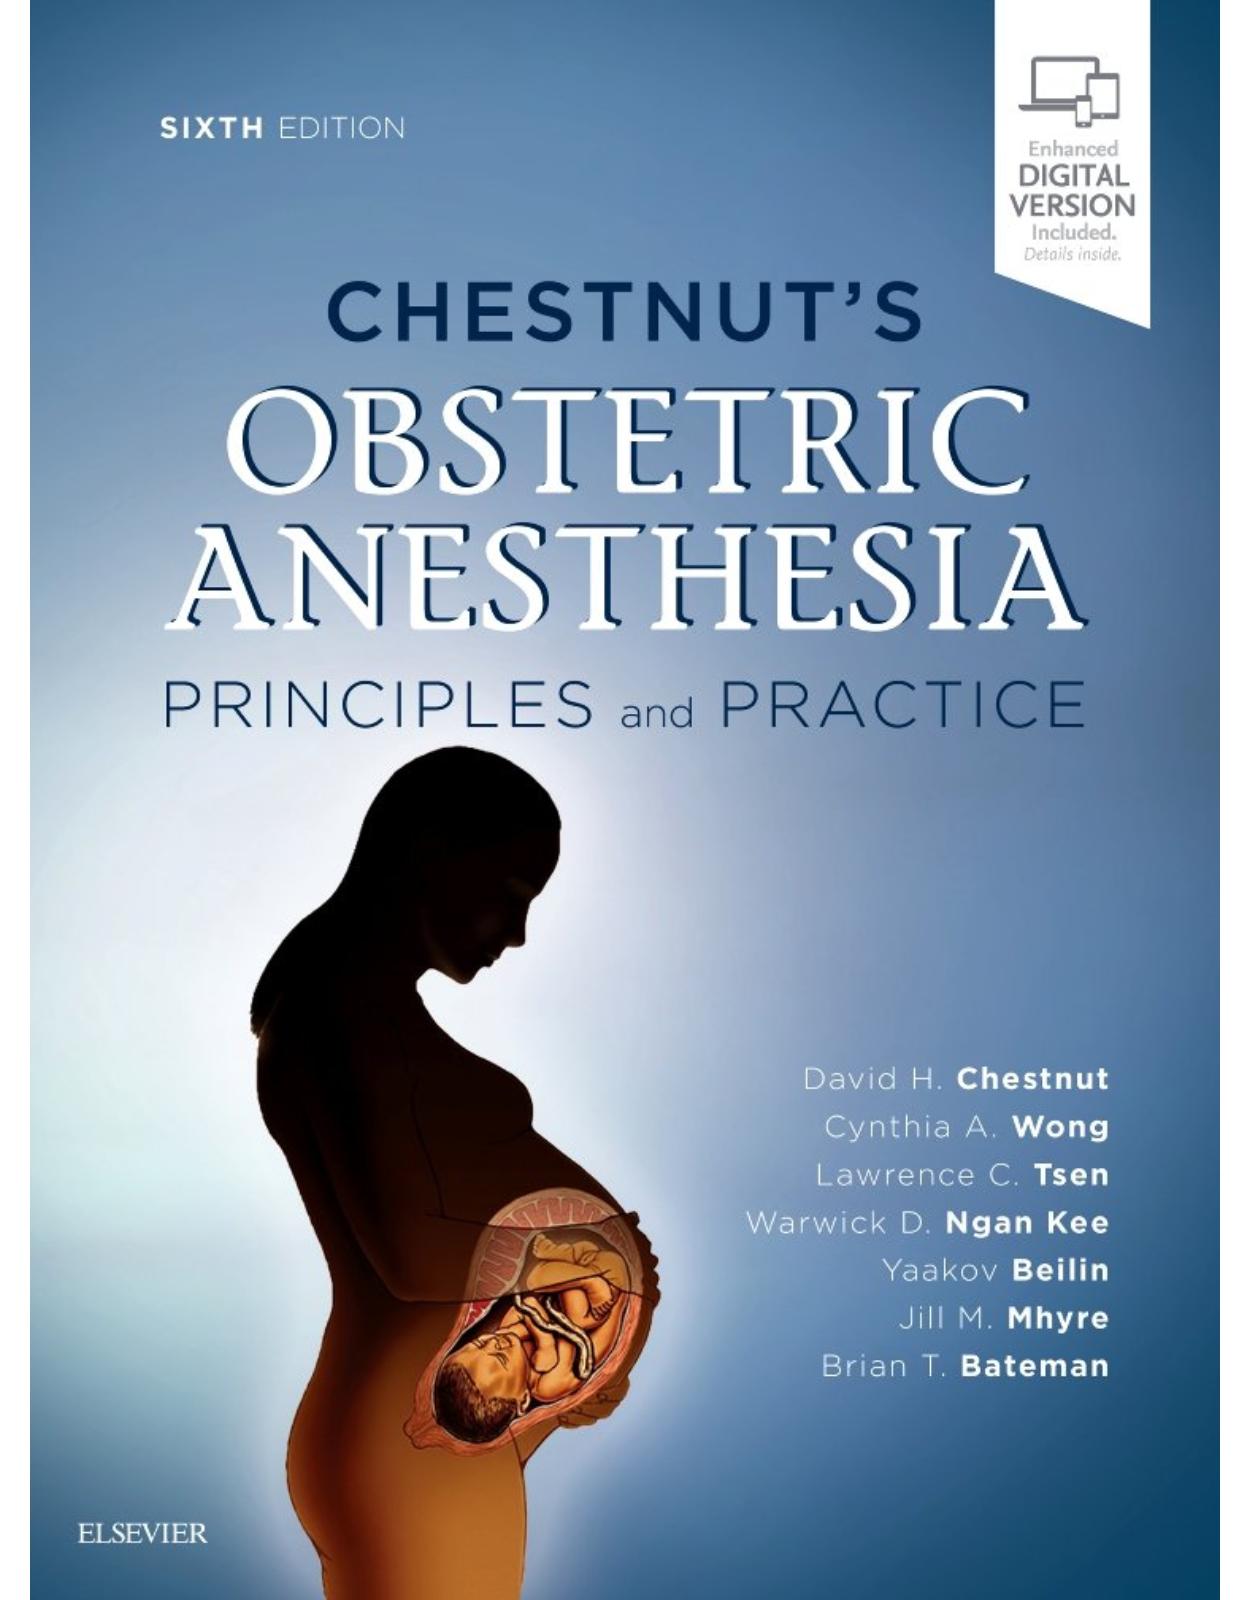 Chestnut’s Obstetric Anesthesia, 6e: Expert Consult - Online and Print 